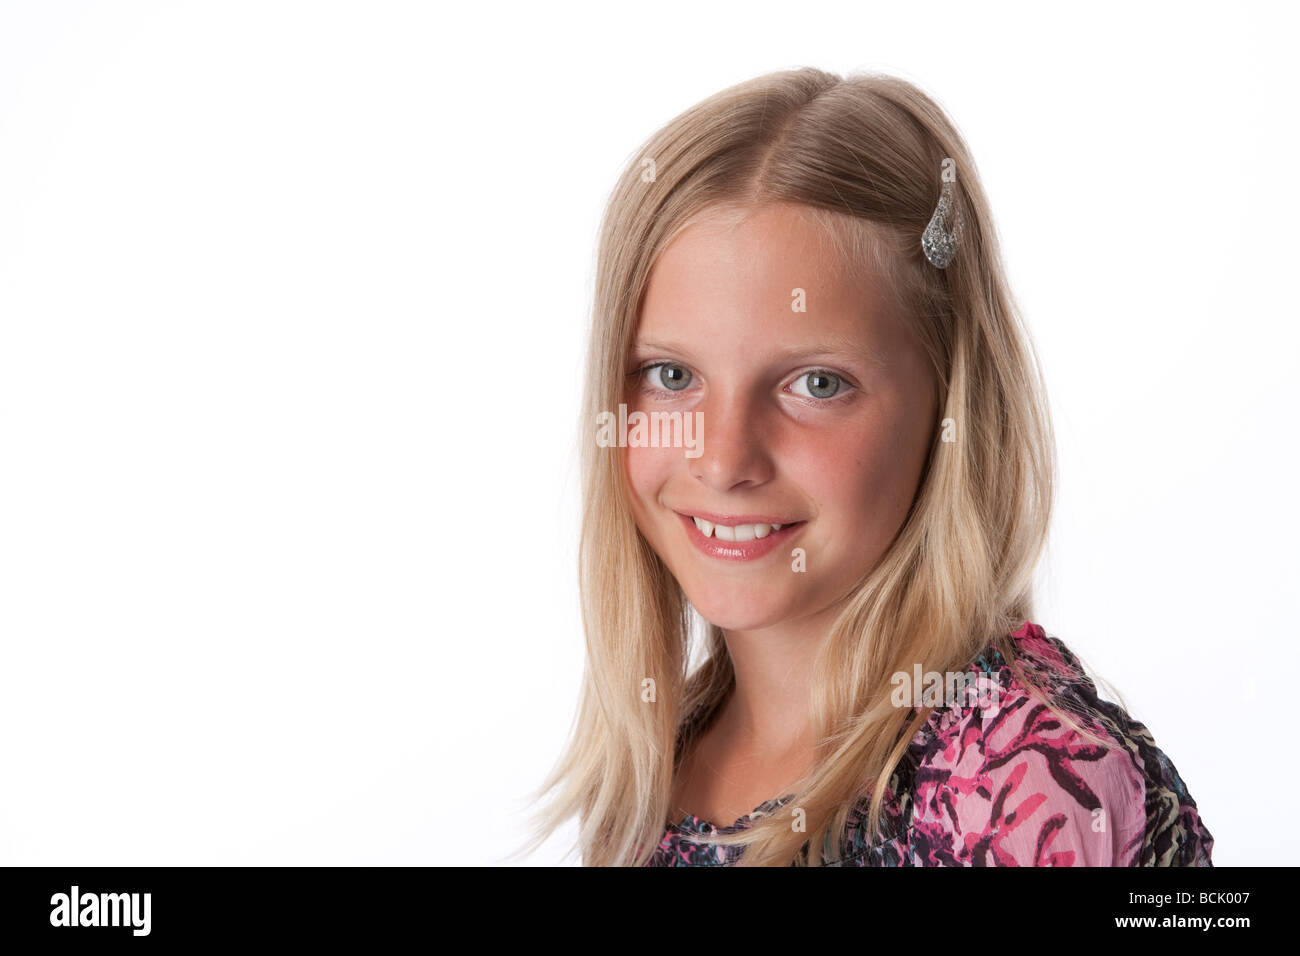 Portrait of a 10 year old girl Stock Photo - Alamy